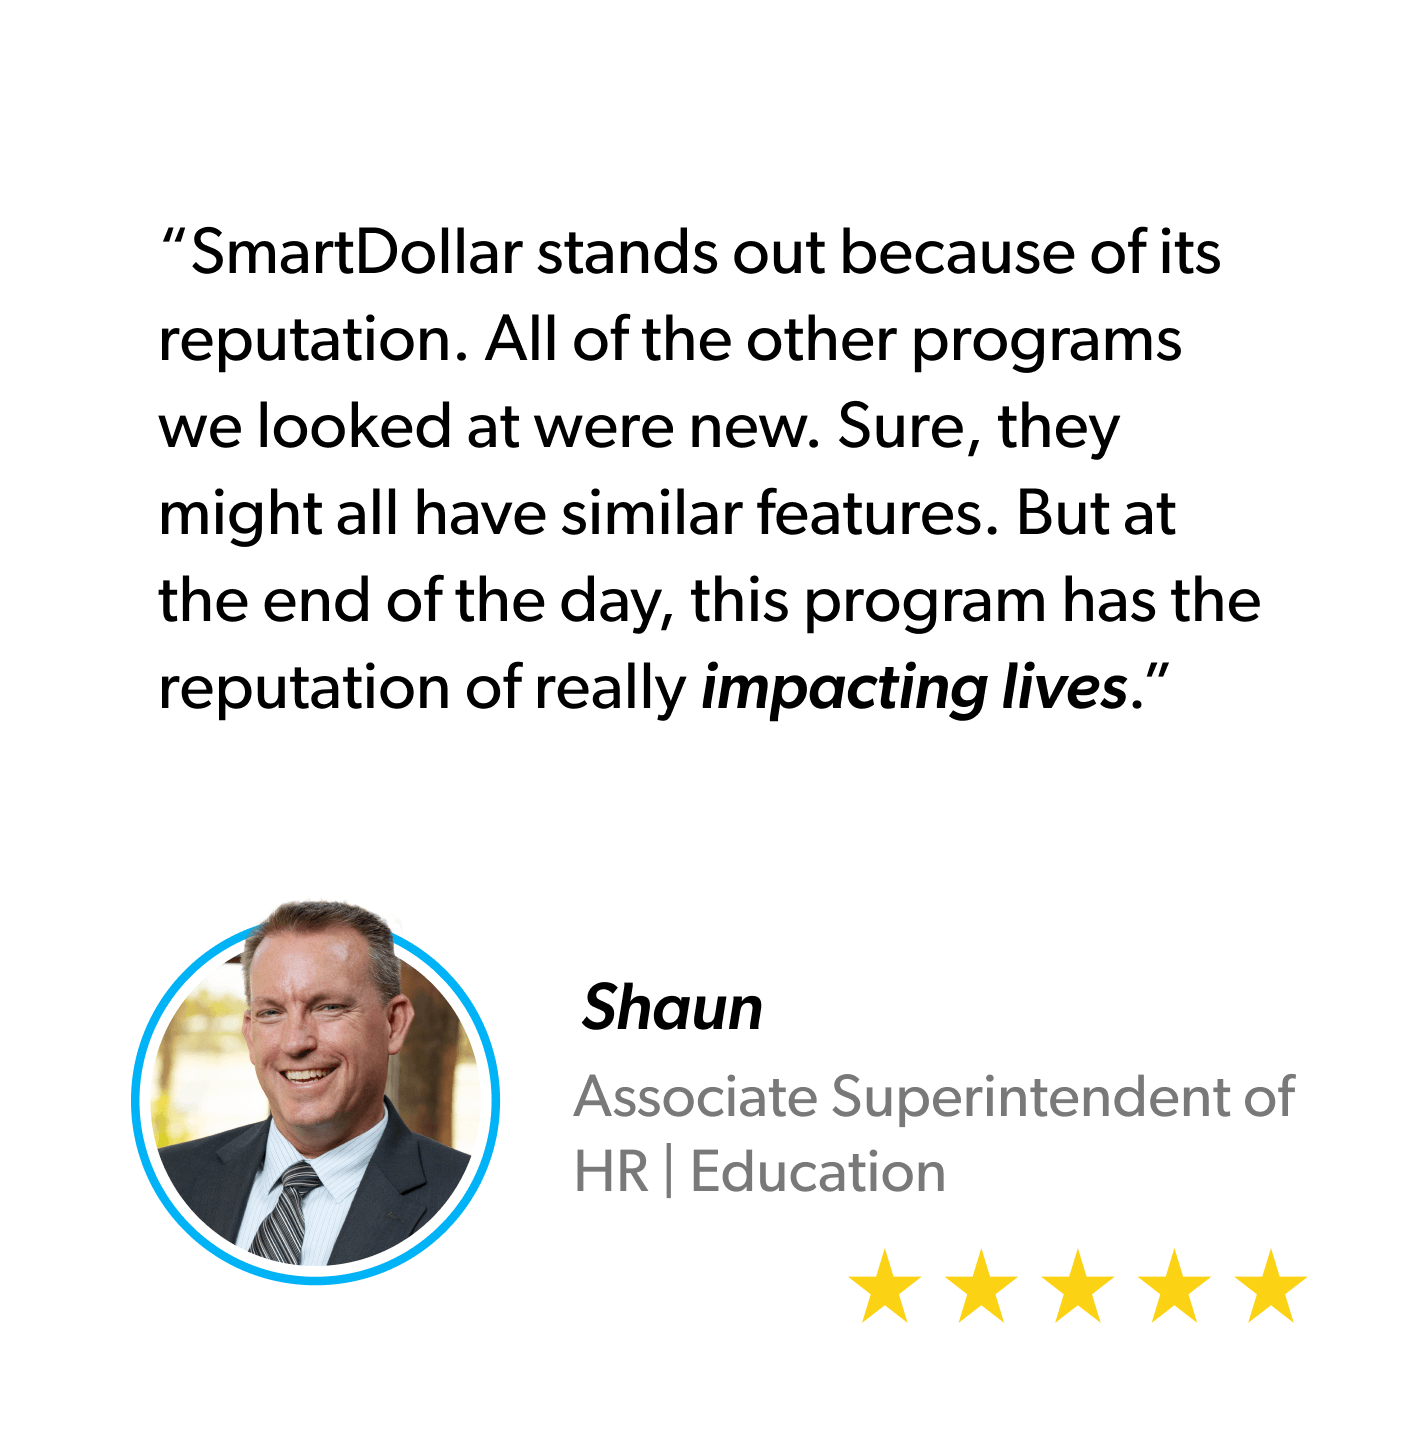 “SmartDollar stands out because of its reputation. All of the other programs we looked at were new. Sure, they might all have similar features. But at the end of the day, this program has the reputation of really impacting lives.” - Shaun, Associate Superintendent of HR, Education